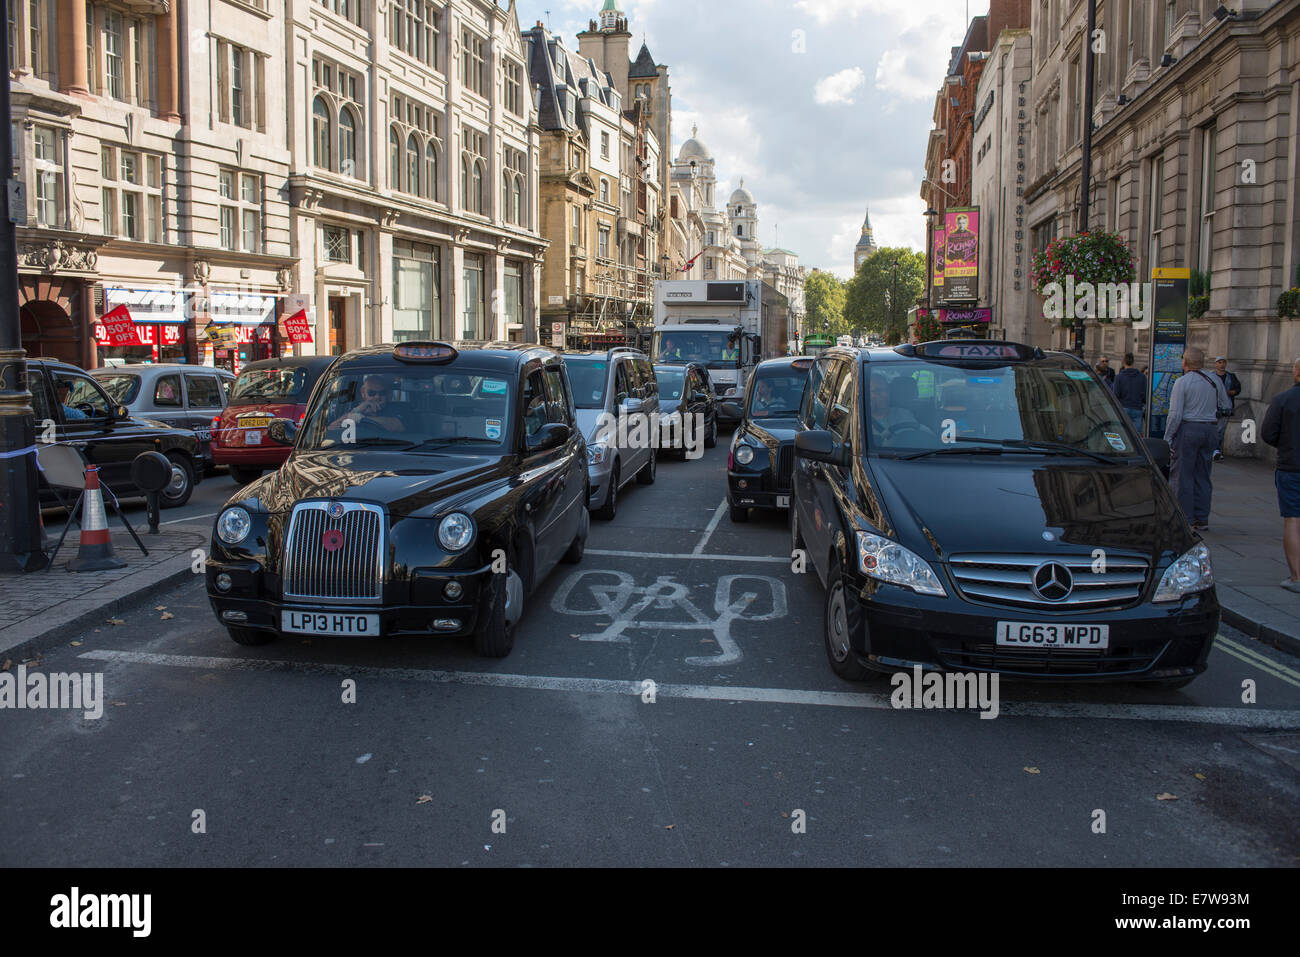 Central London, UK. 24th September 2014. Black cab taxi drivers protest TfL’s taxi policies today by driving in central London at a snails pace around 2pm. Areas affected are around Parliament Square, Whitehall and Trafalgar Square. Taxis line up on both sides of Whitehall. Credit:  Malcolm Park editorial/Alamy Live News. Stock Photo